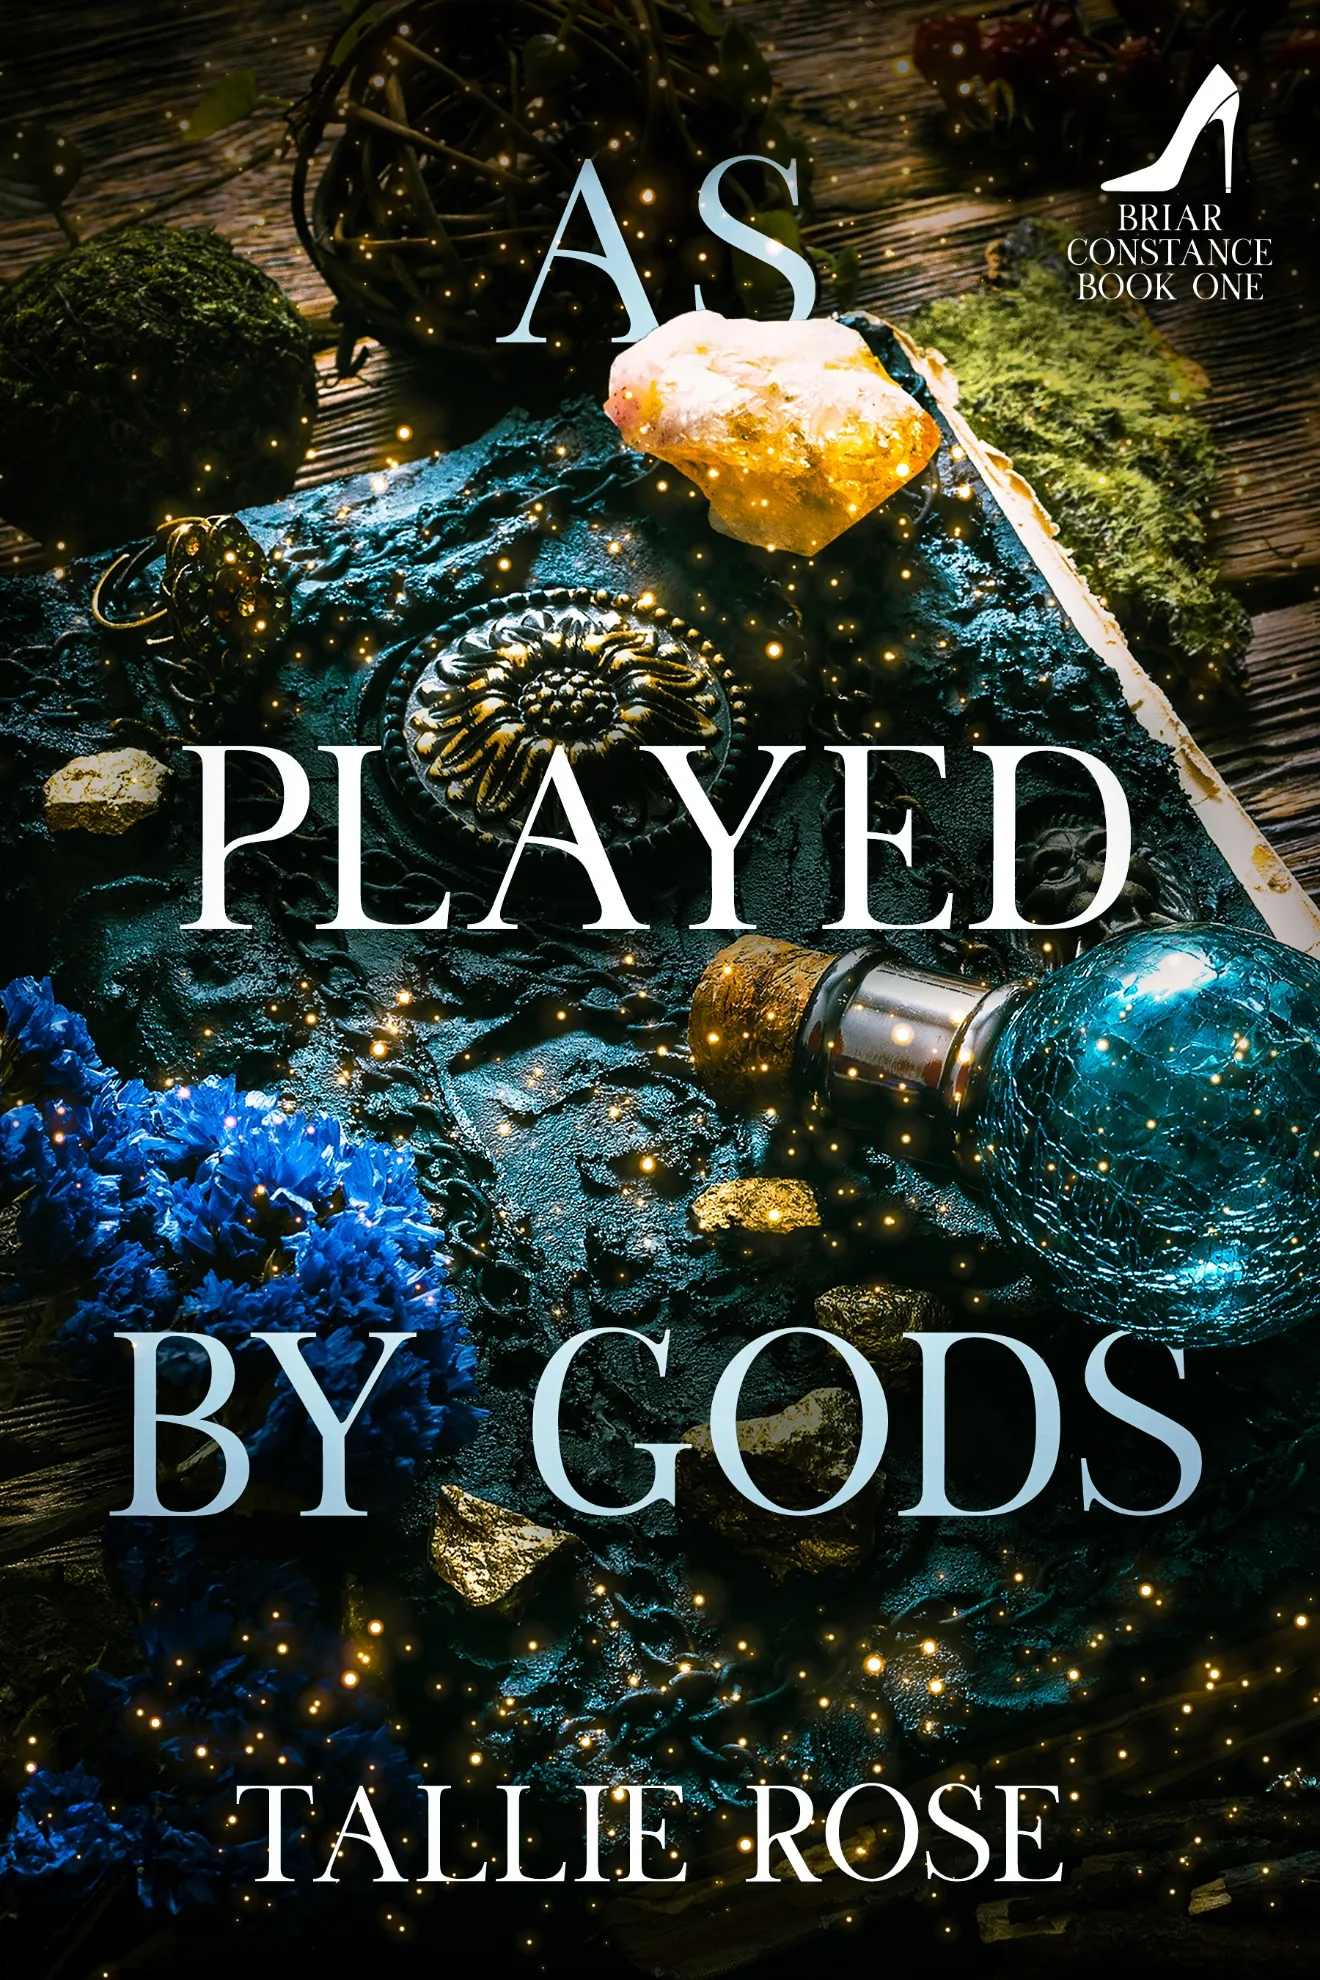 As Played by Gods (Briar Constance #1)